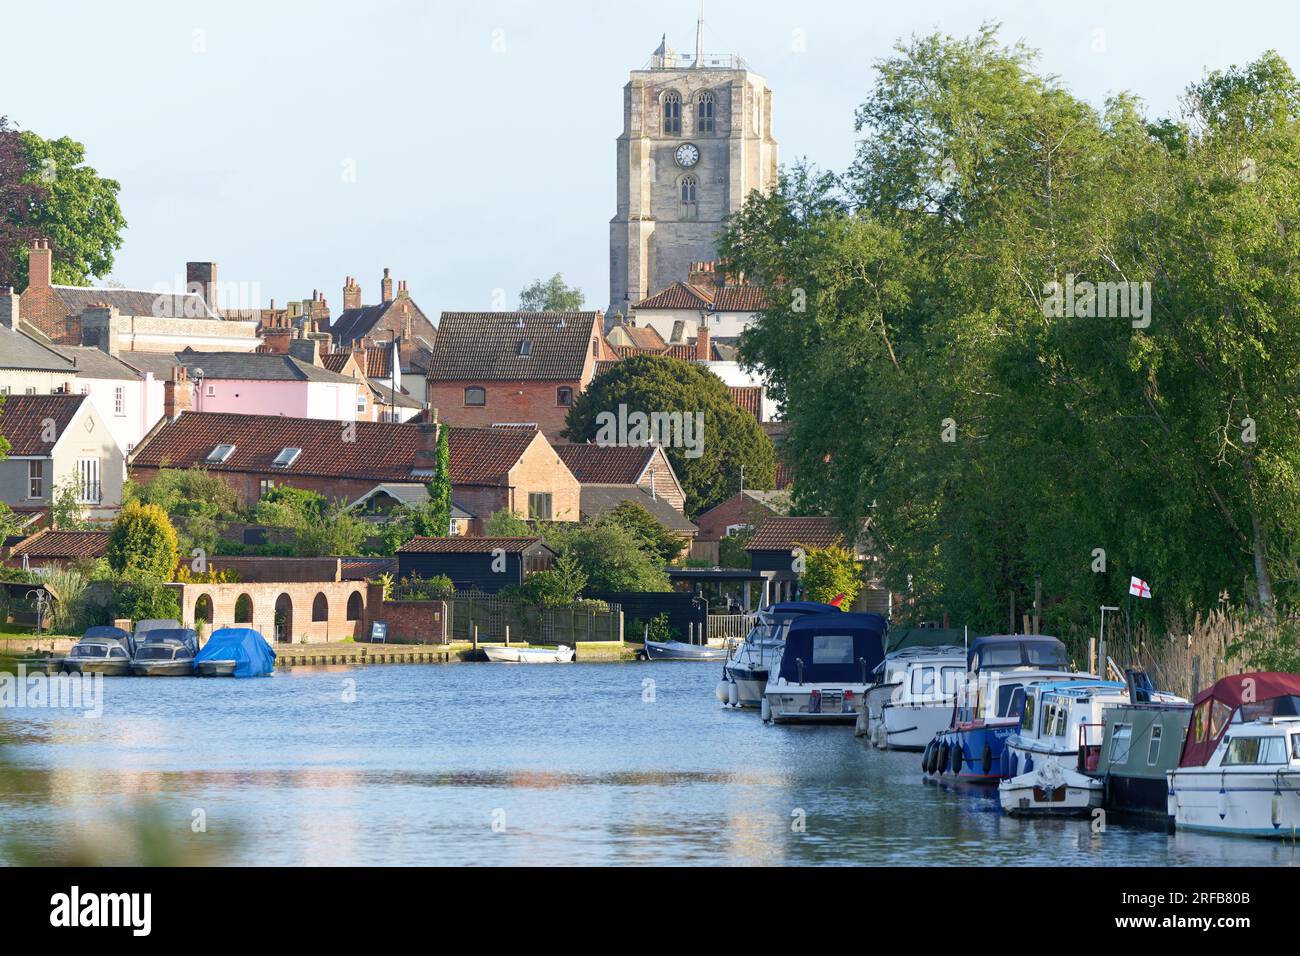 A view of moored boats and church on the River Waveney at Beccles, Suffolk, England, Uk Stock Photo